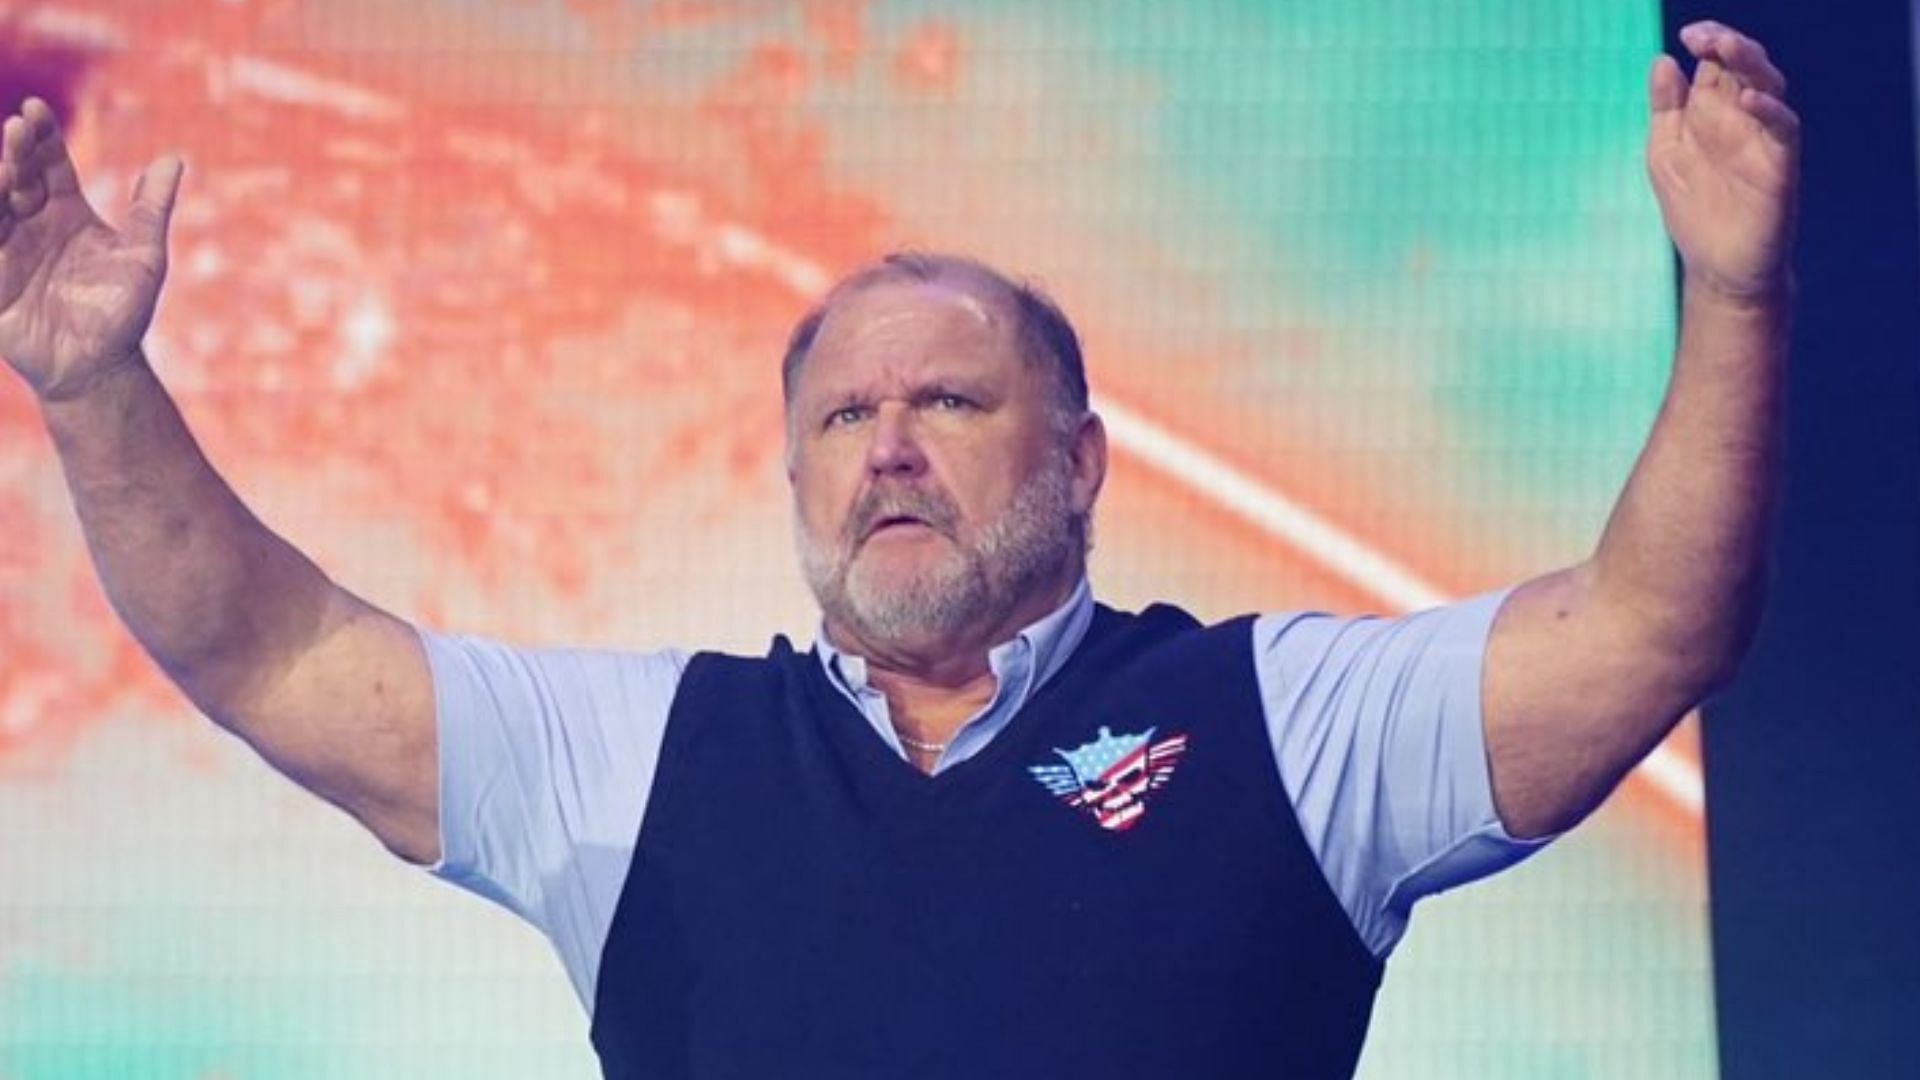 Arn Anderson has revealed what he taught an AEW star